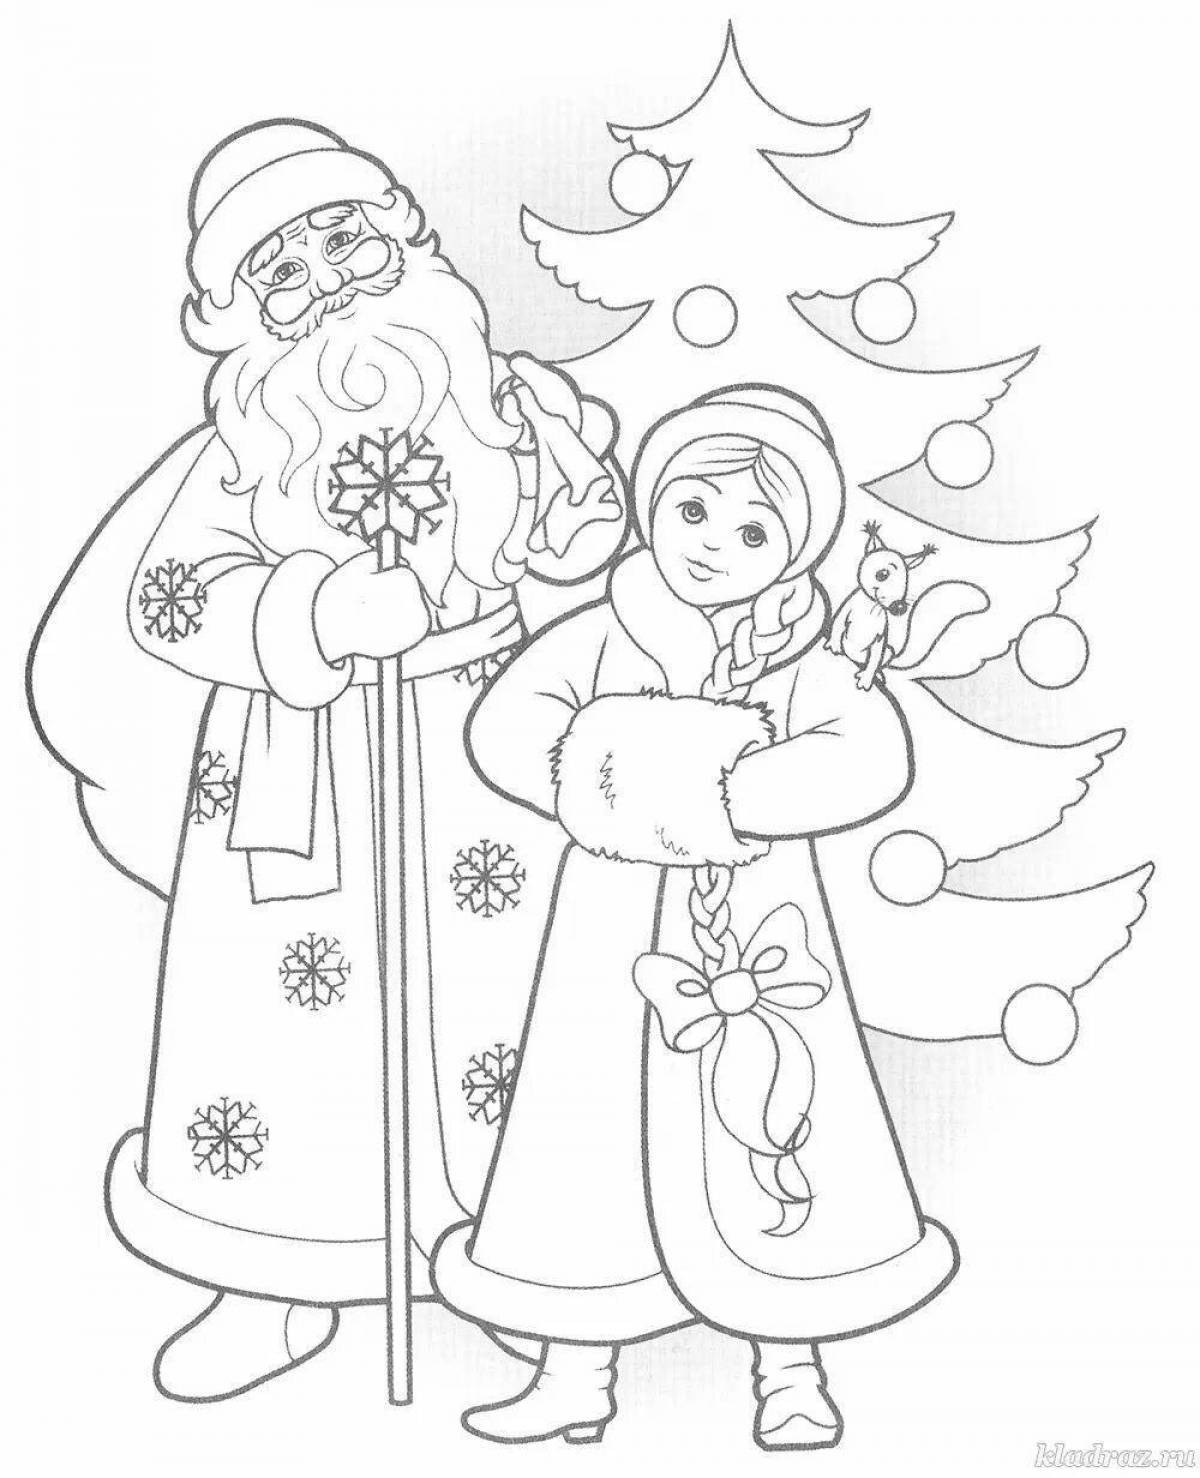 Outstanding Christmas coloring book for 6-7 year olds